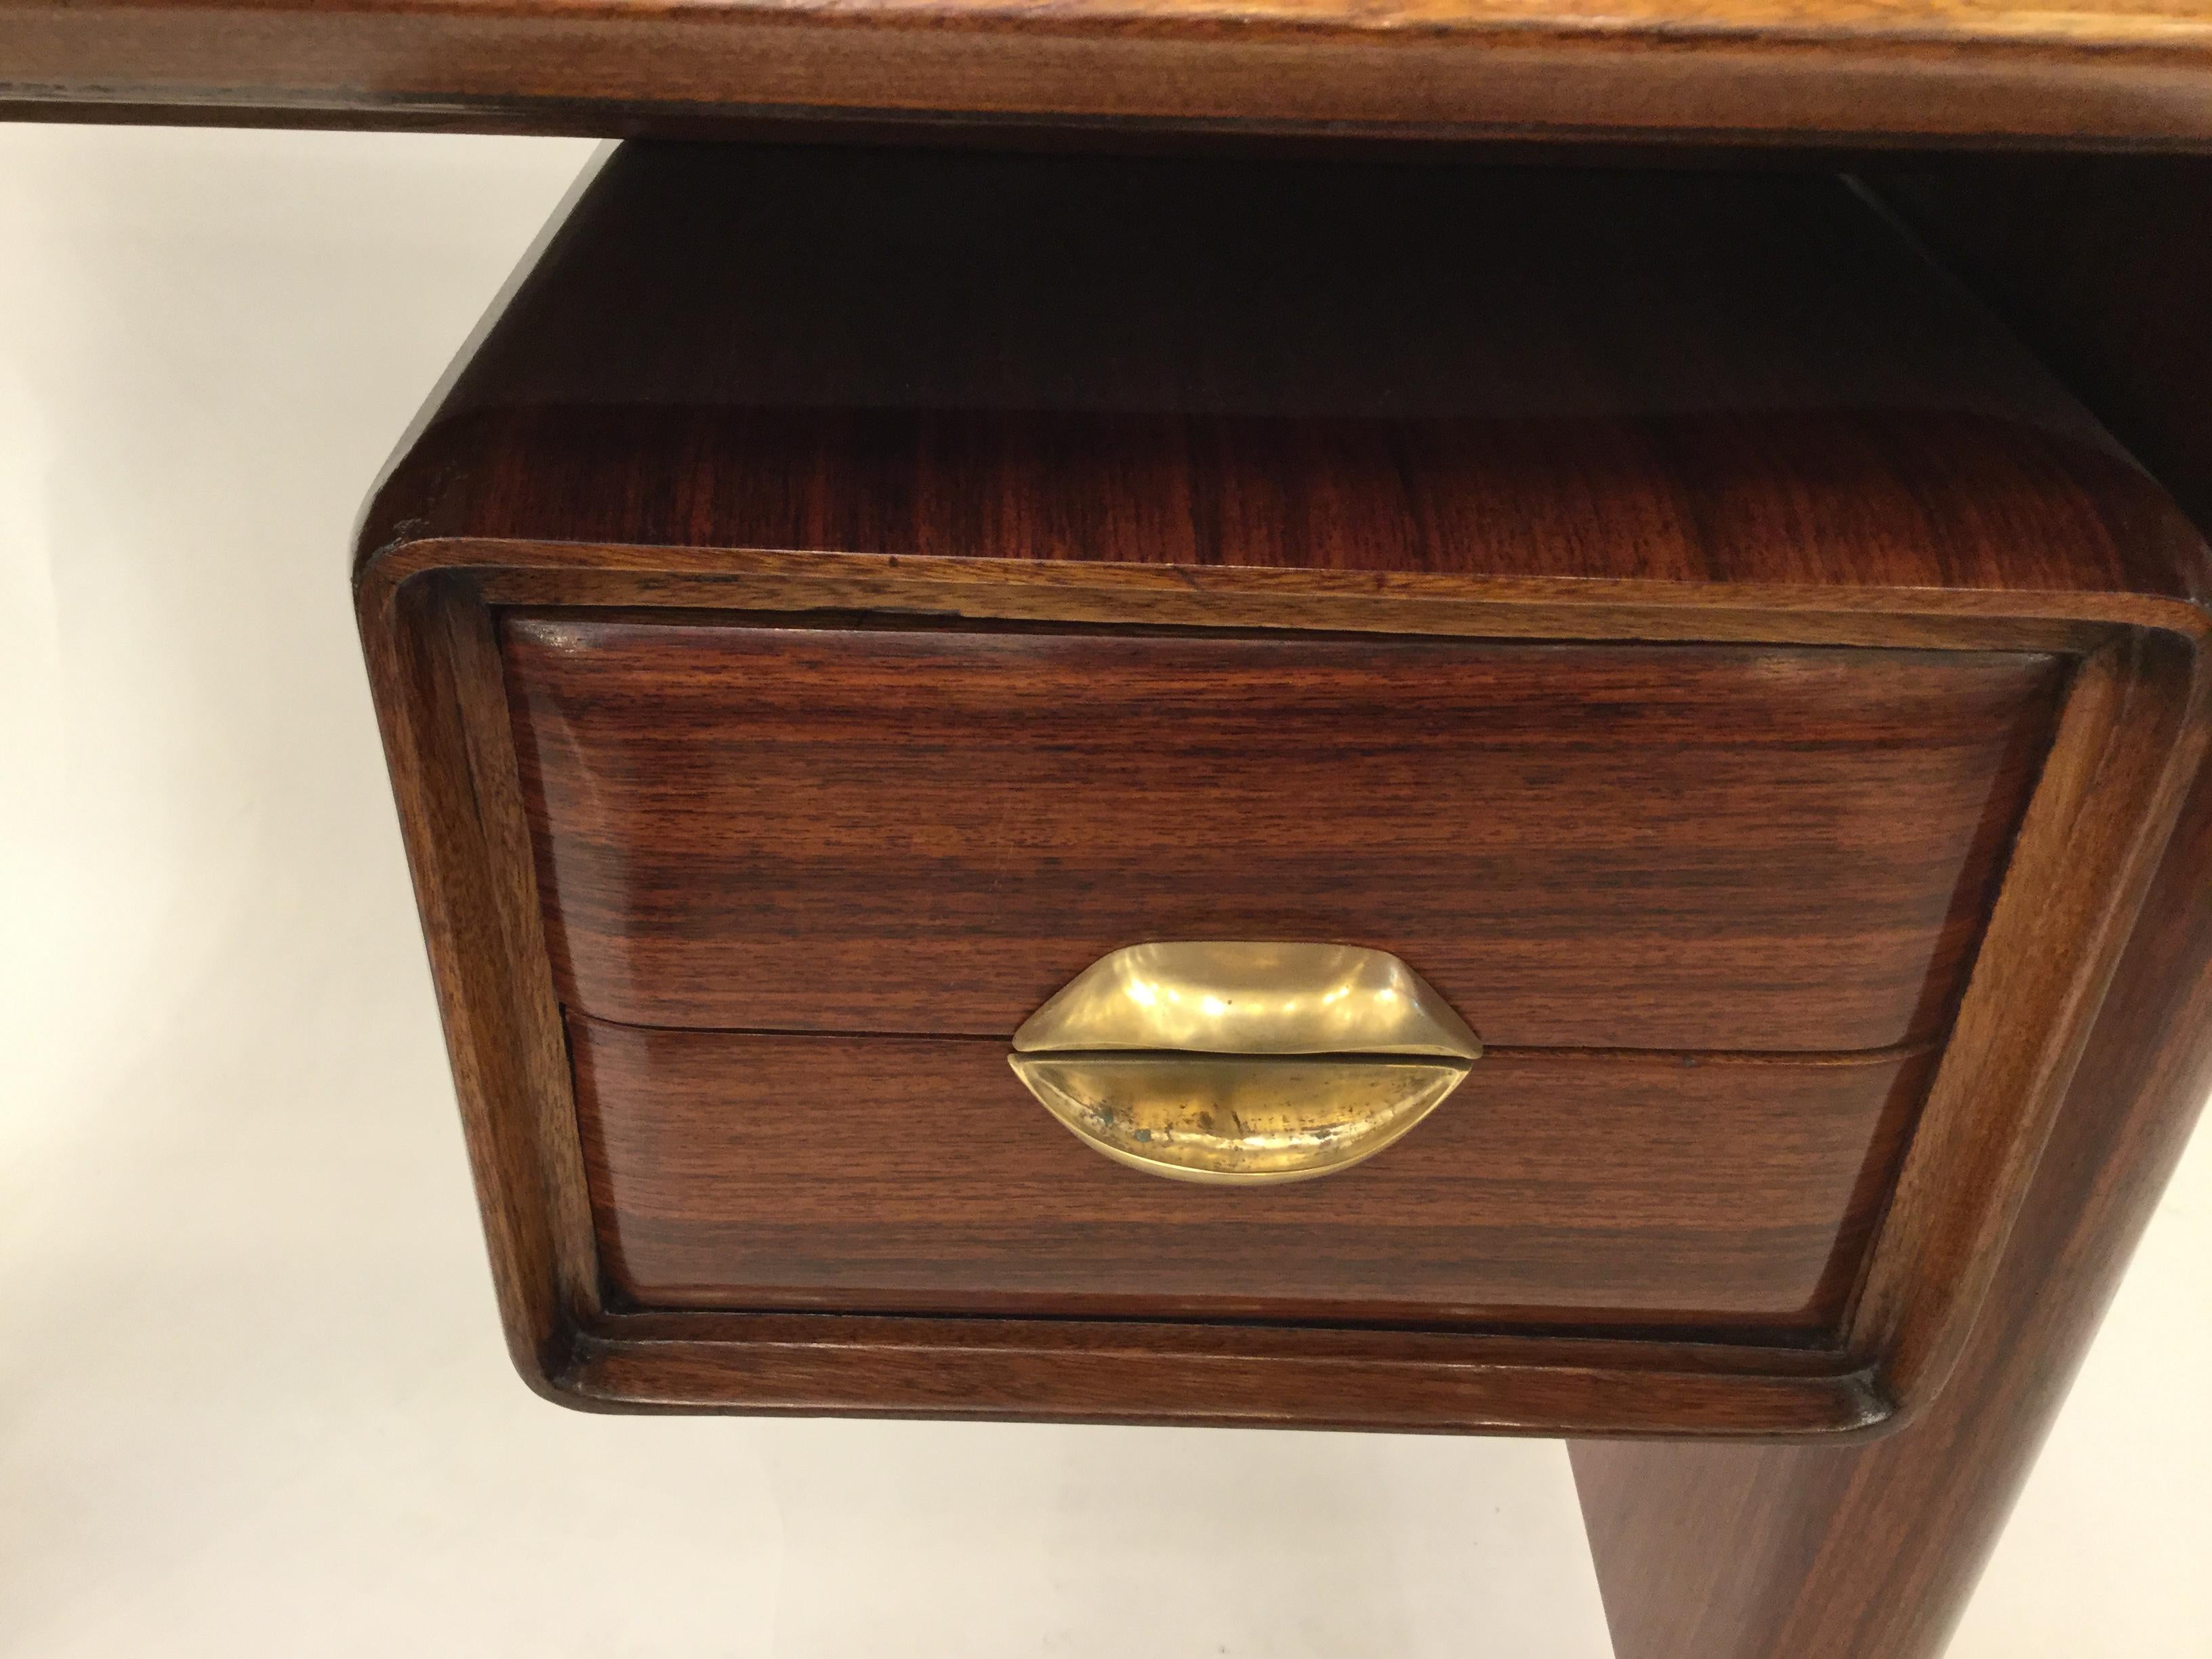 Small writing desk designed by Vittorio Dassi. It has a solid solid structure supported by conic brass feet and two drawers with beautiful handles.